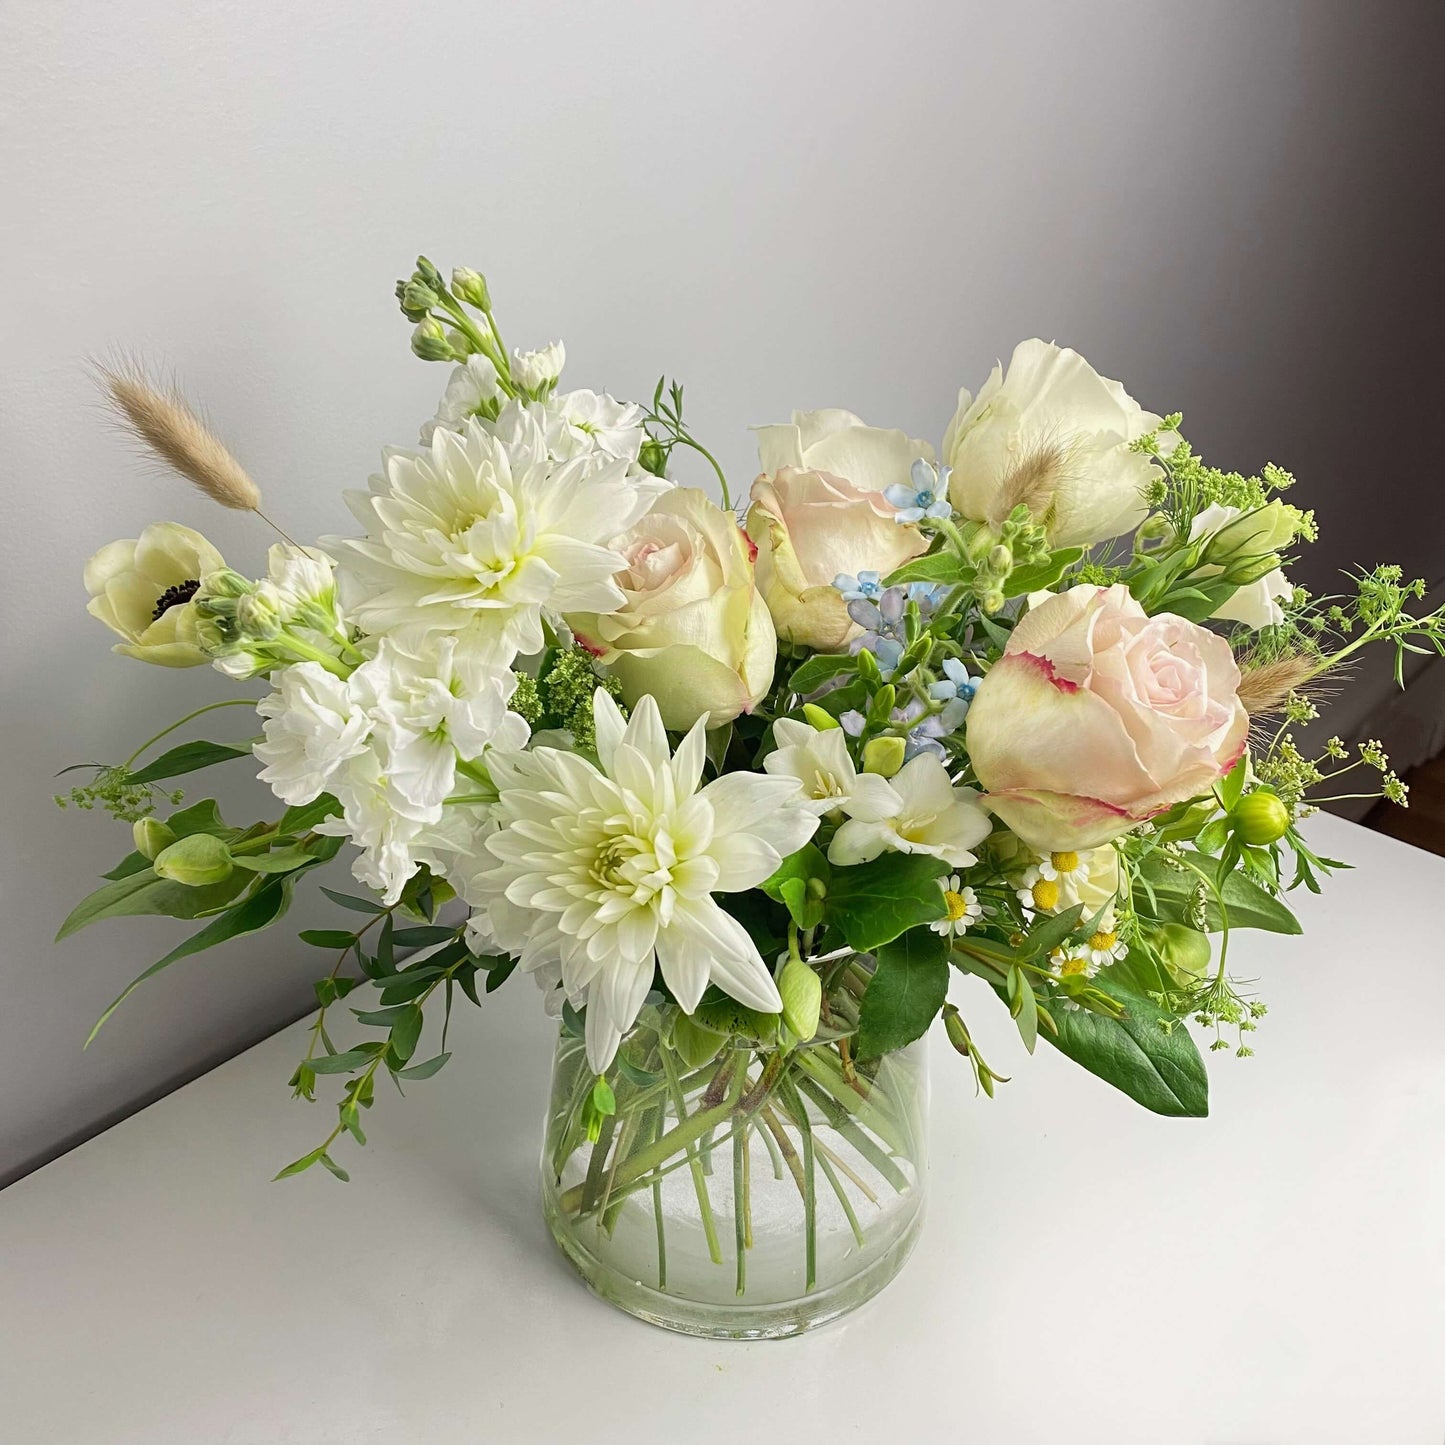 Premium size cape style flower arrangement in clear vase featuring dahlias, roses, twedia, wild greens and other stuff